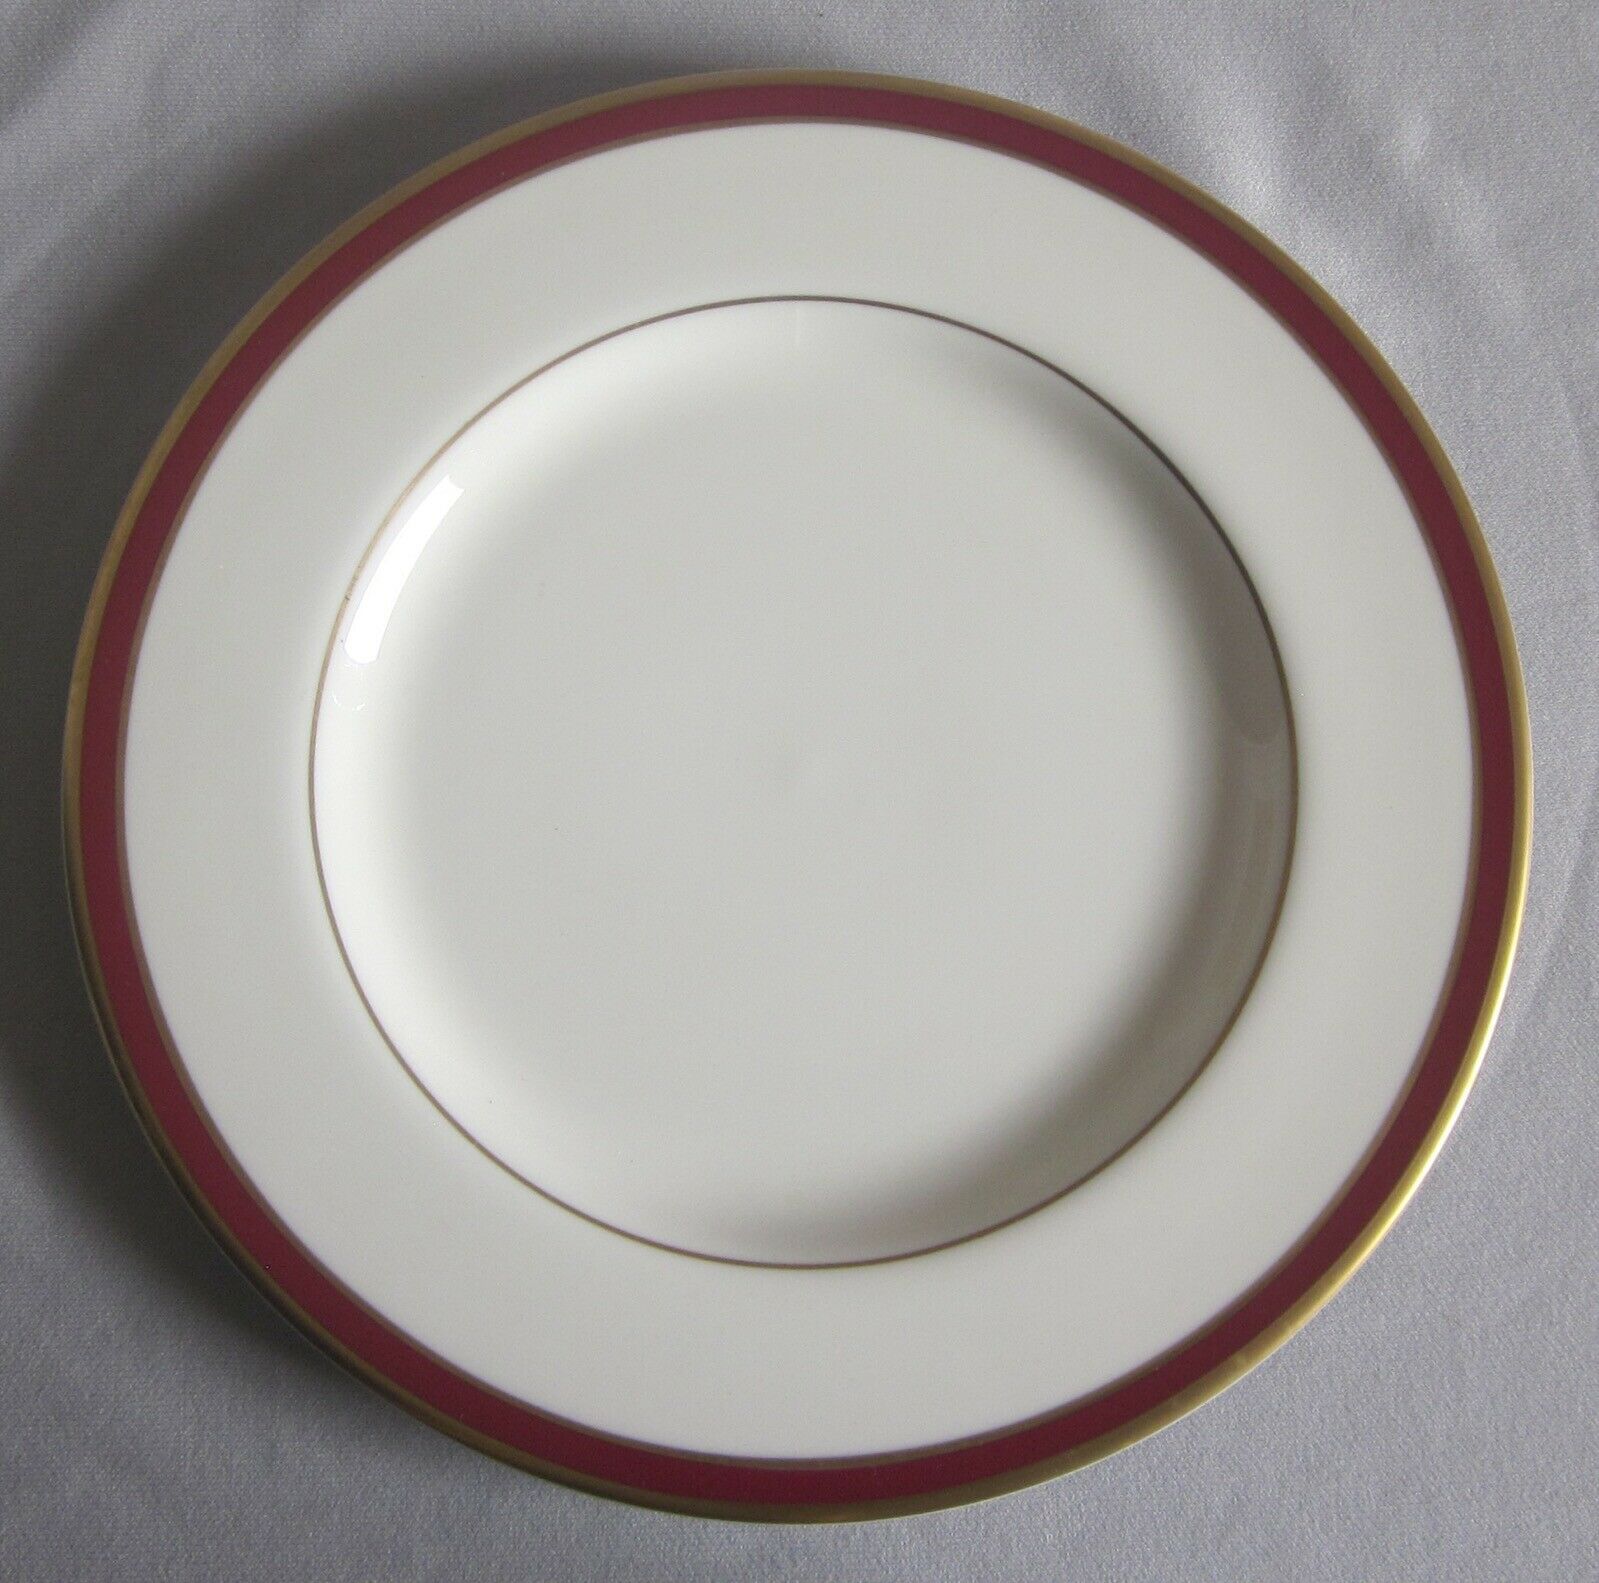 Salad Plate Pickard China PIC40 Red Band Gold Rings & Verge New 8 1/4